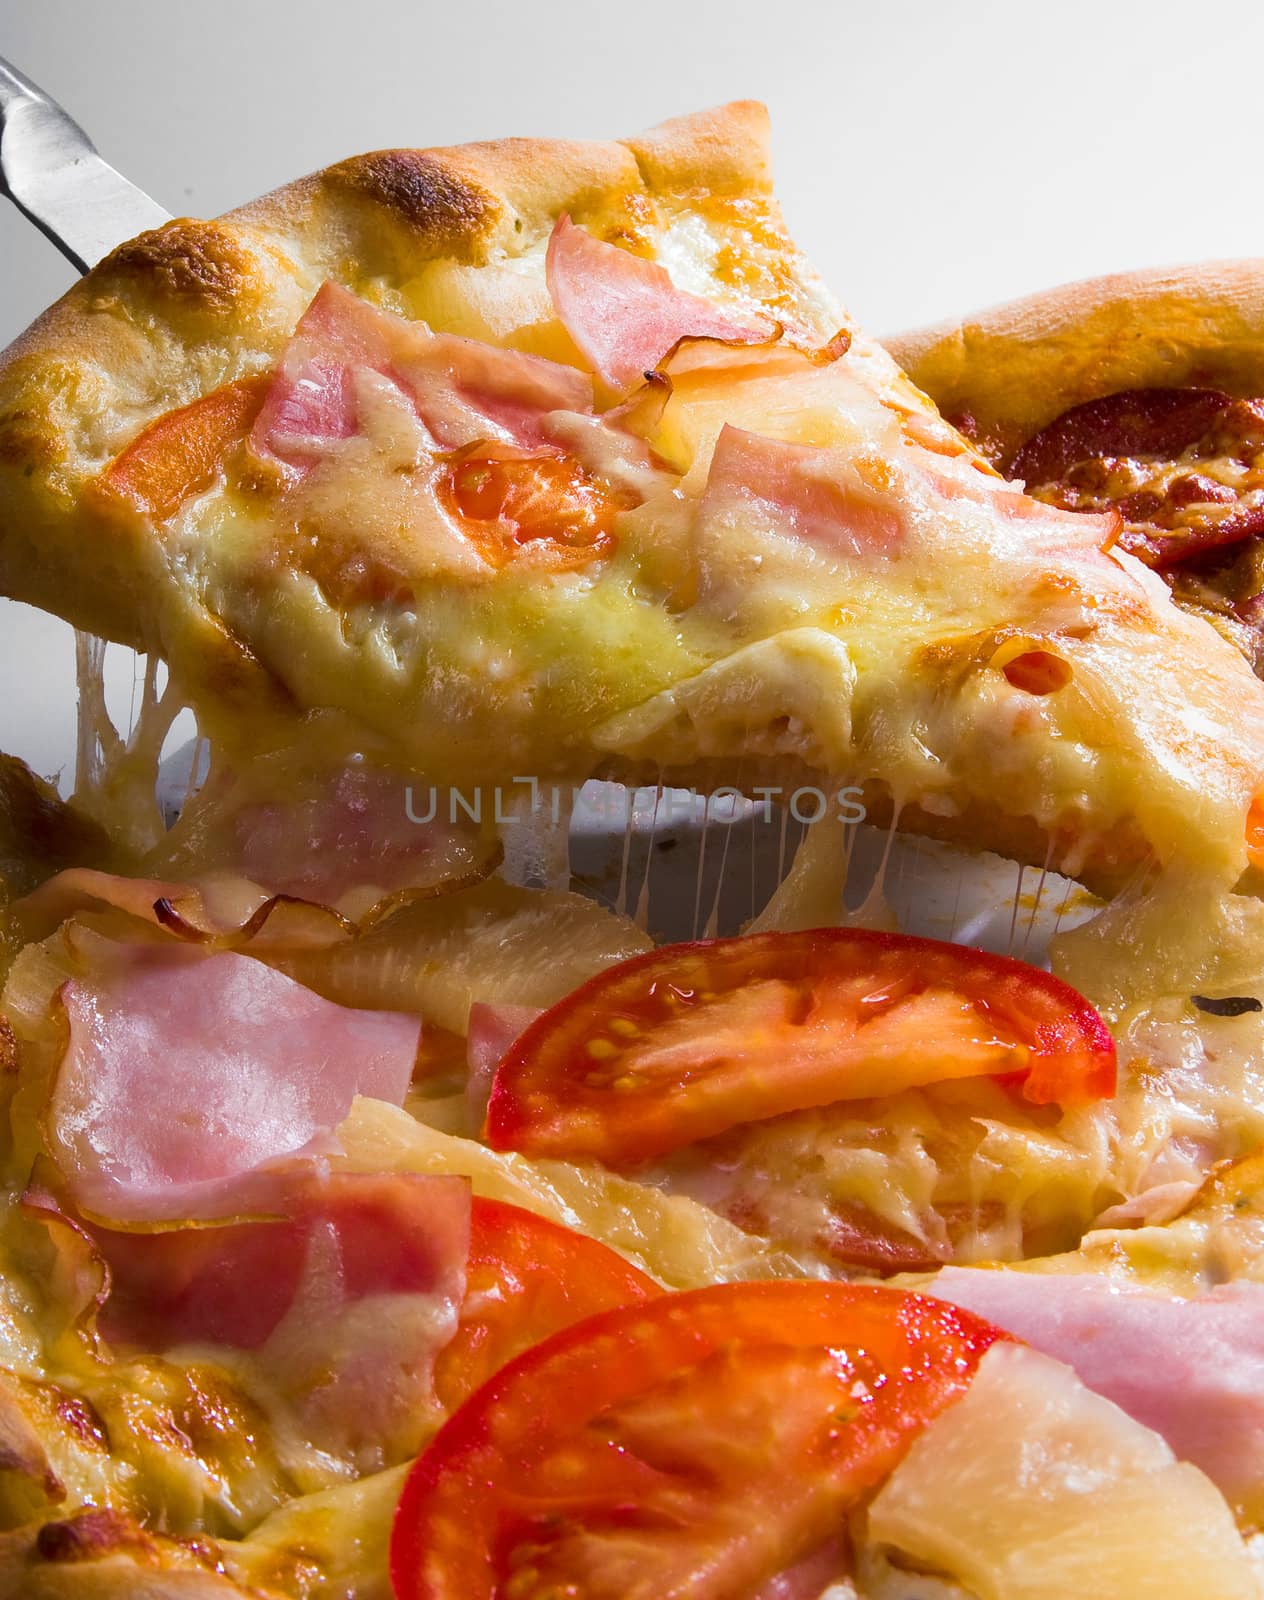 pizza with ham and sausage